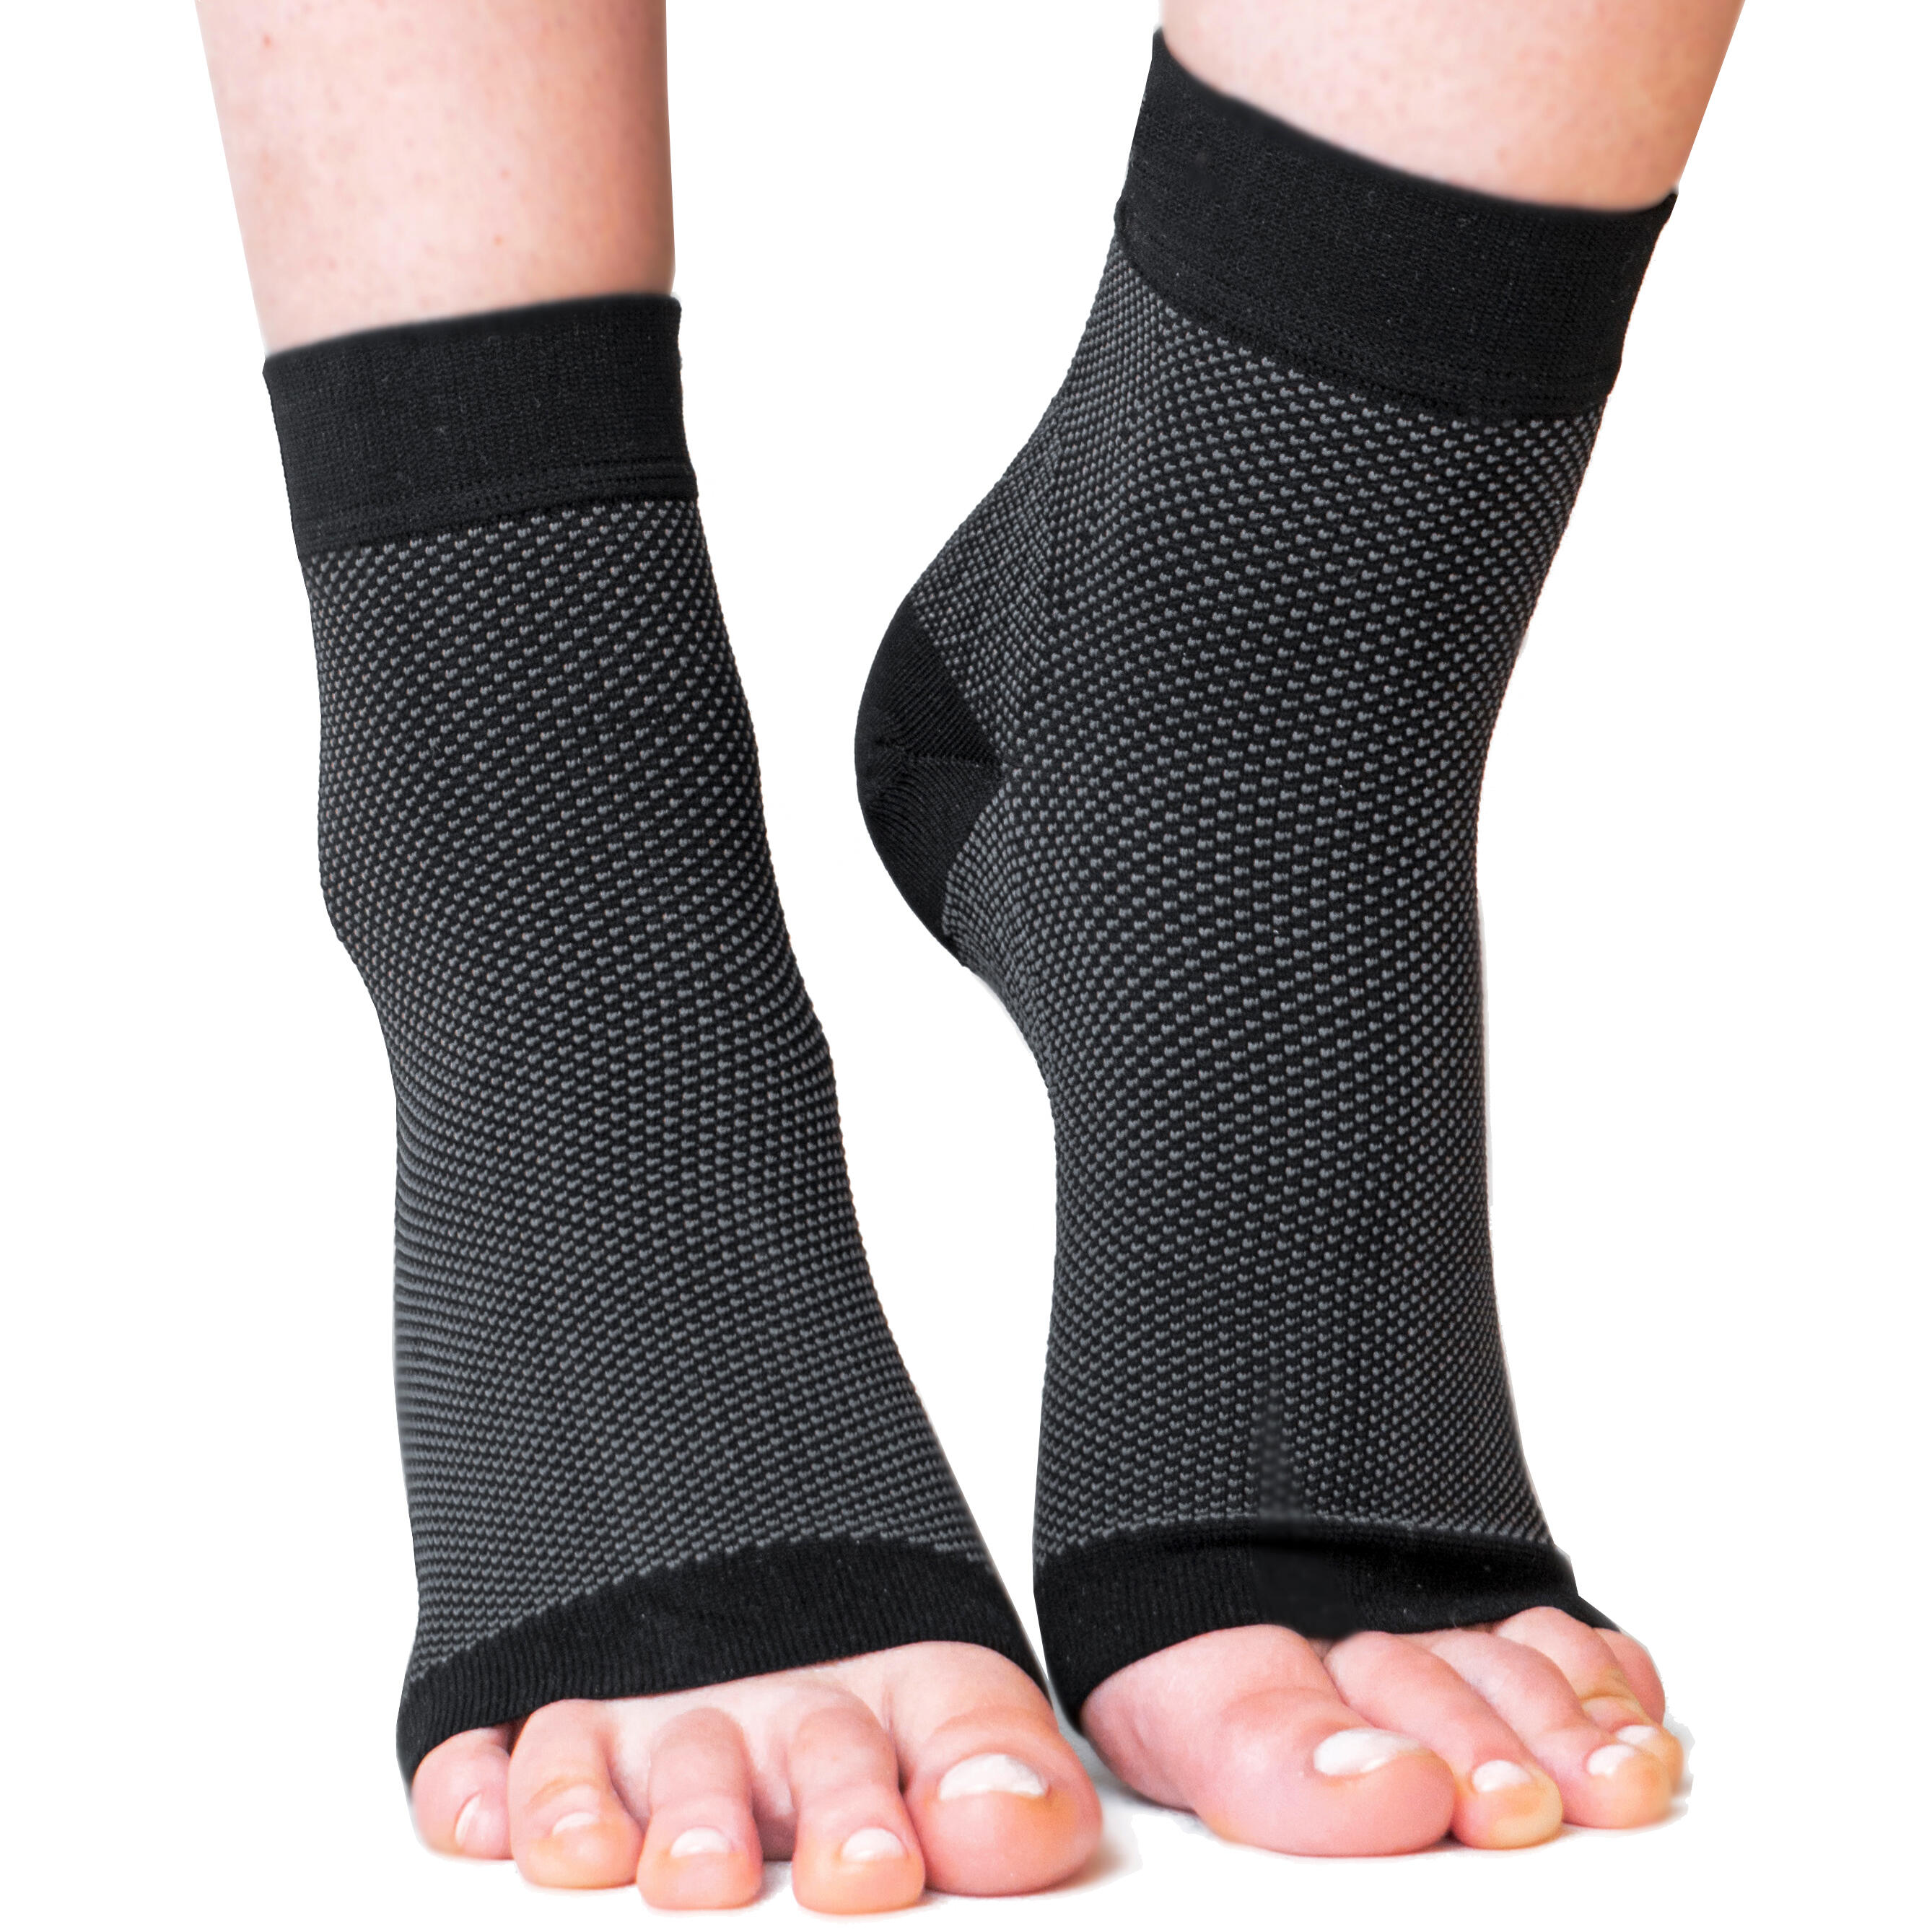 Ankle Foot Support Compression Brace, Plantar Fasciitis Socks (2 Pairs) 2/6